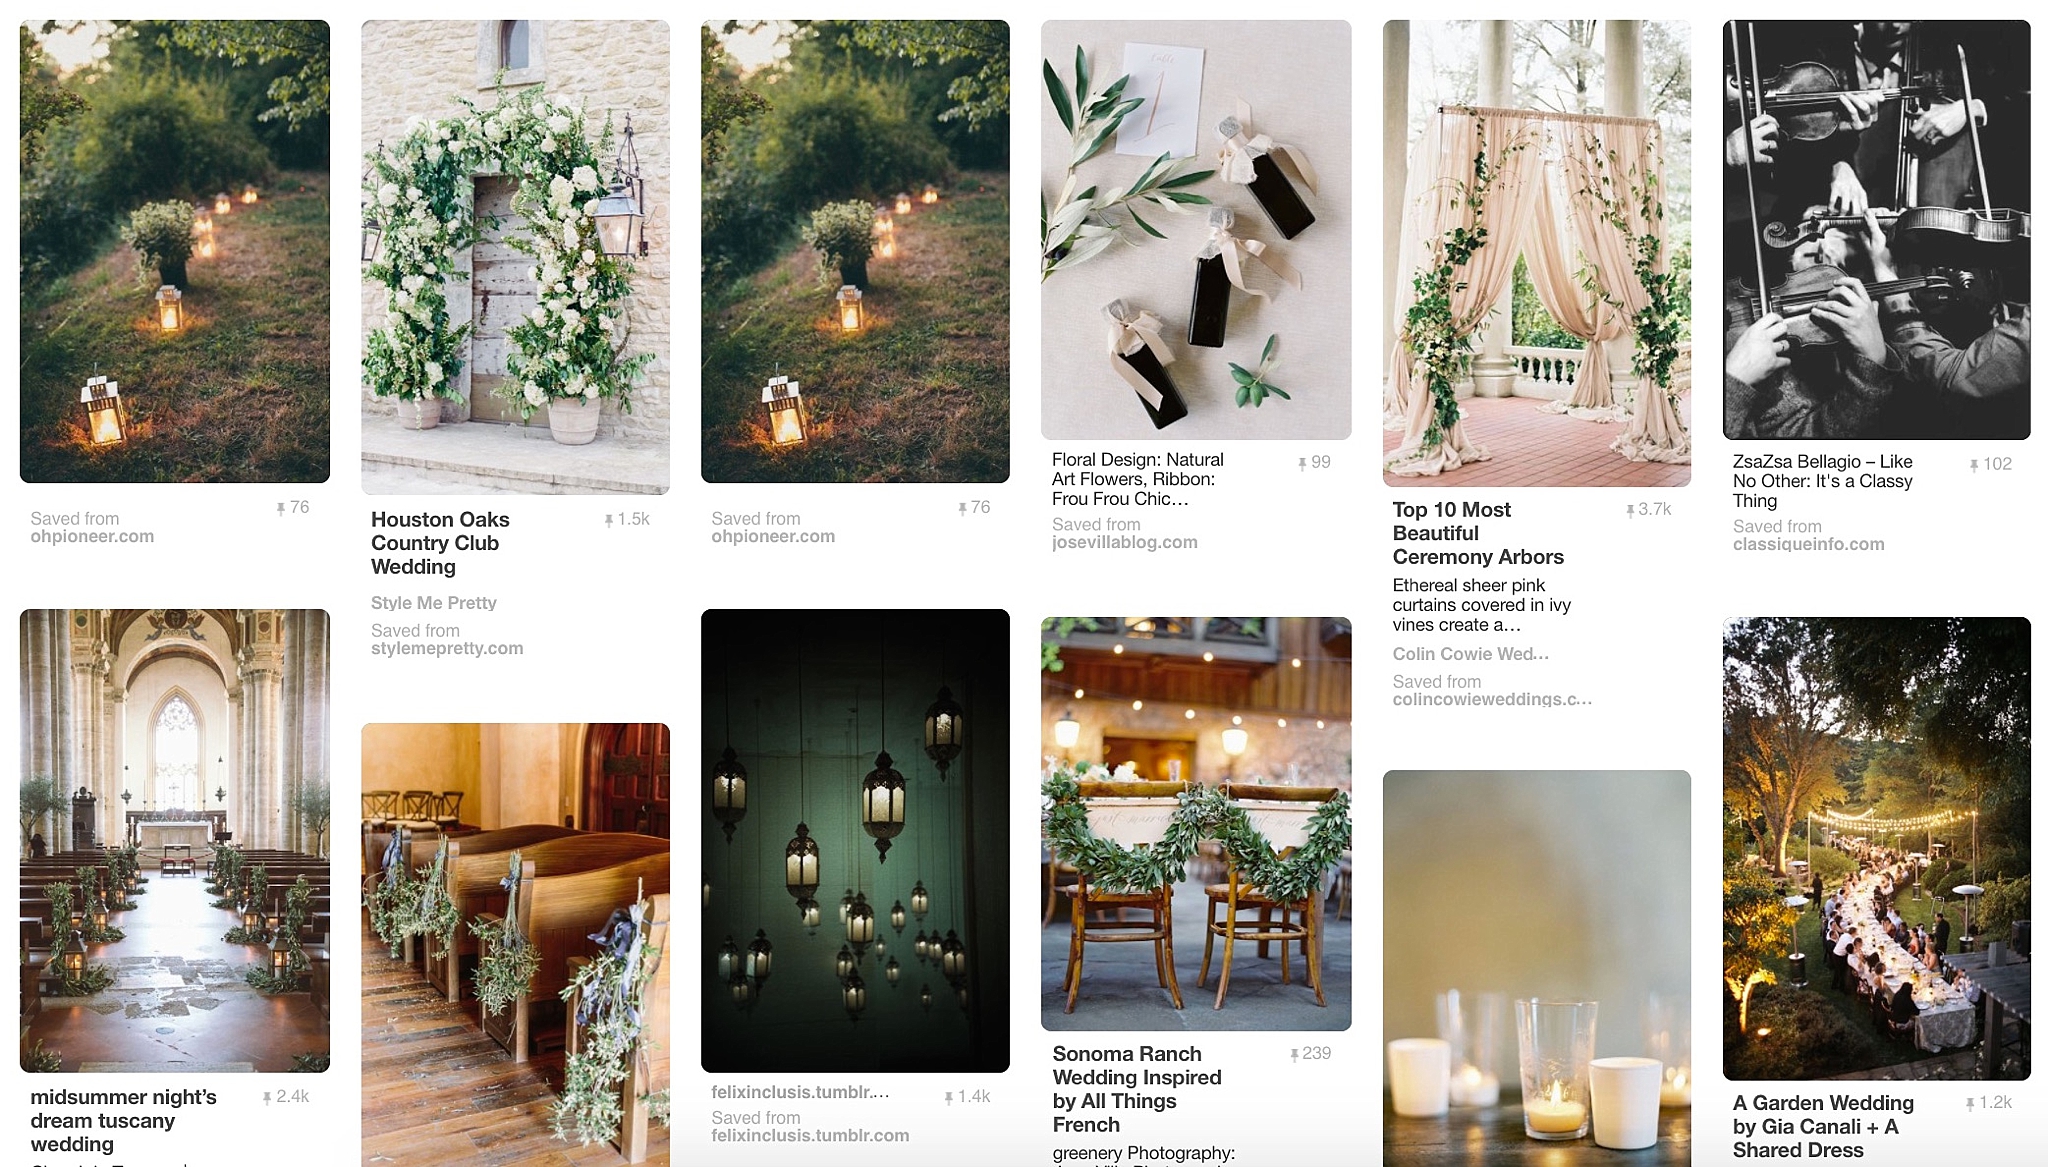 This Washington, DC wedding photographer discusses the pros and cons when using Pinterest to plan your wedding.